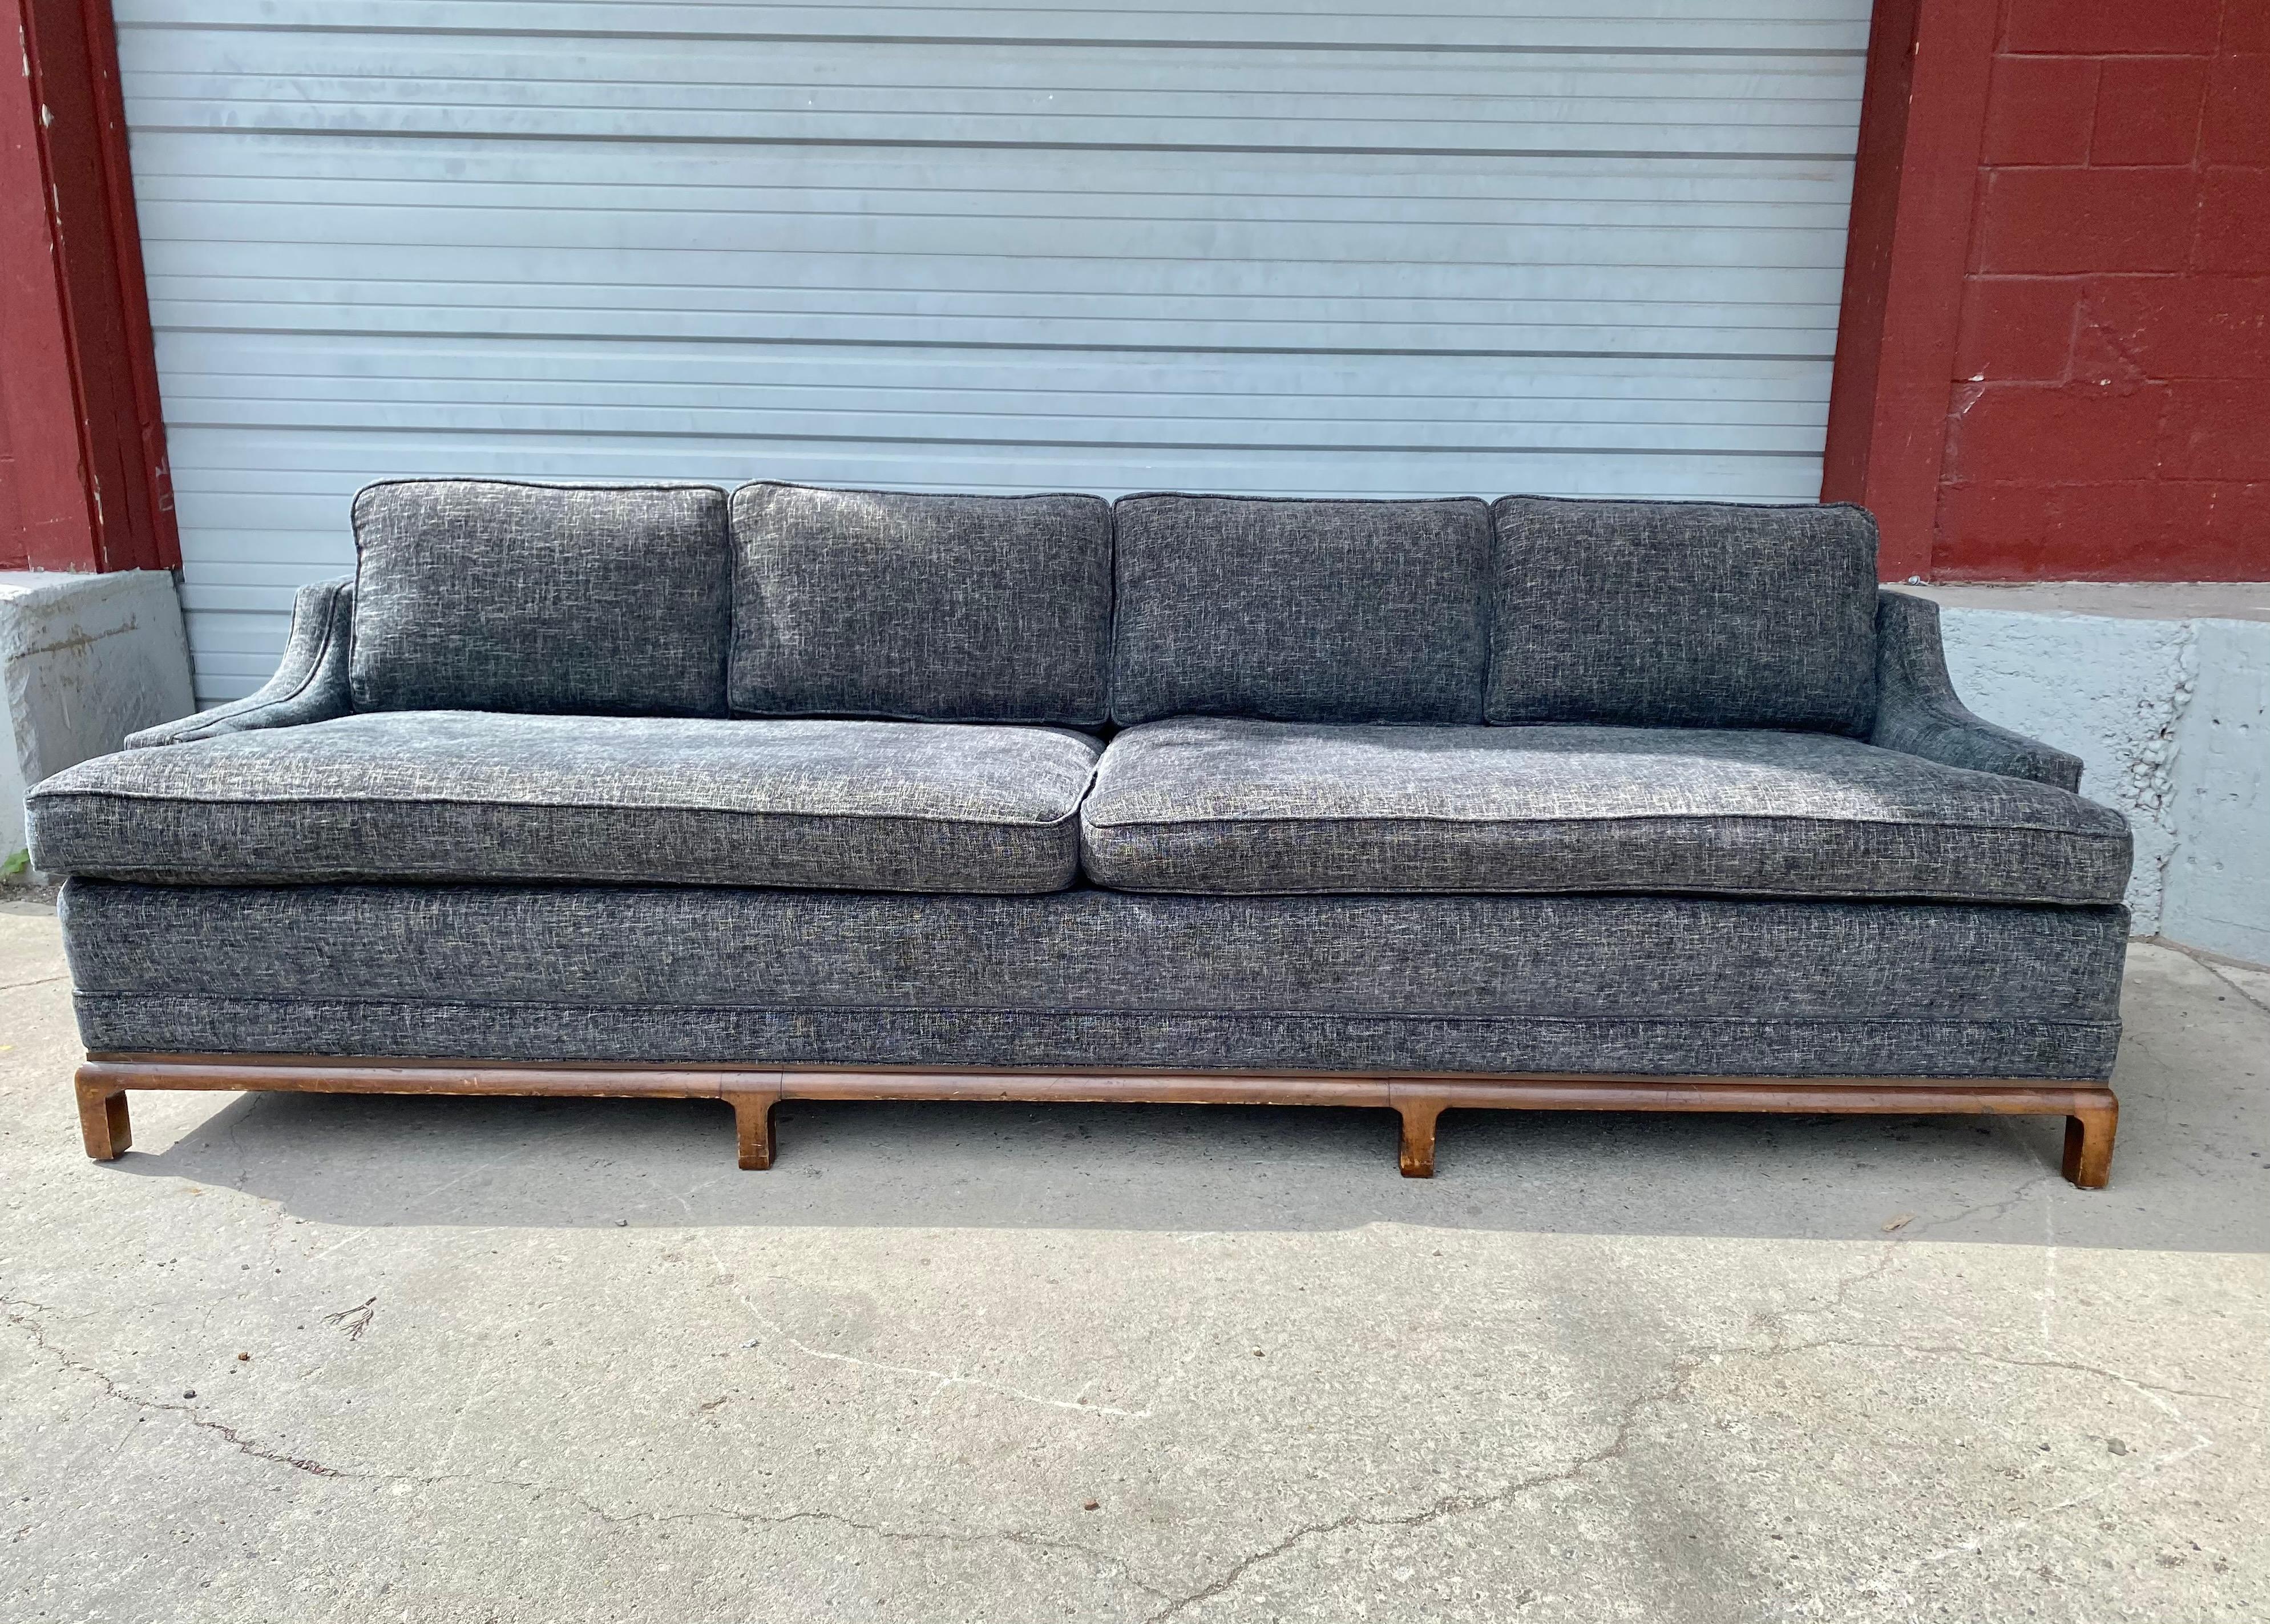 Asian modernist sofa attributed to T. H. Robsjohn-Gibbings for Widdicomb, recently re-upholstered. wonderful grey/ blue wool fabric. Extremely comfortable, superior quality and construction, great modernist design, solid wood Asian Style base, Hand